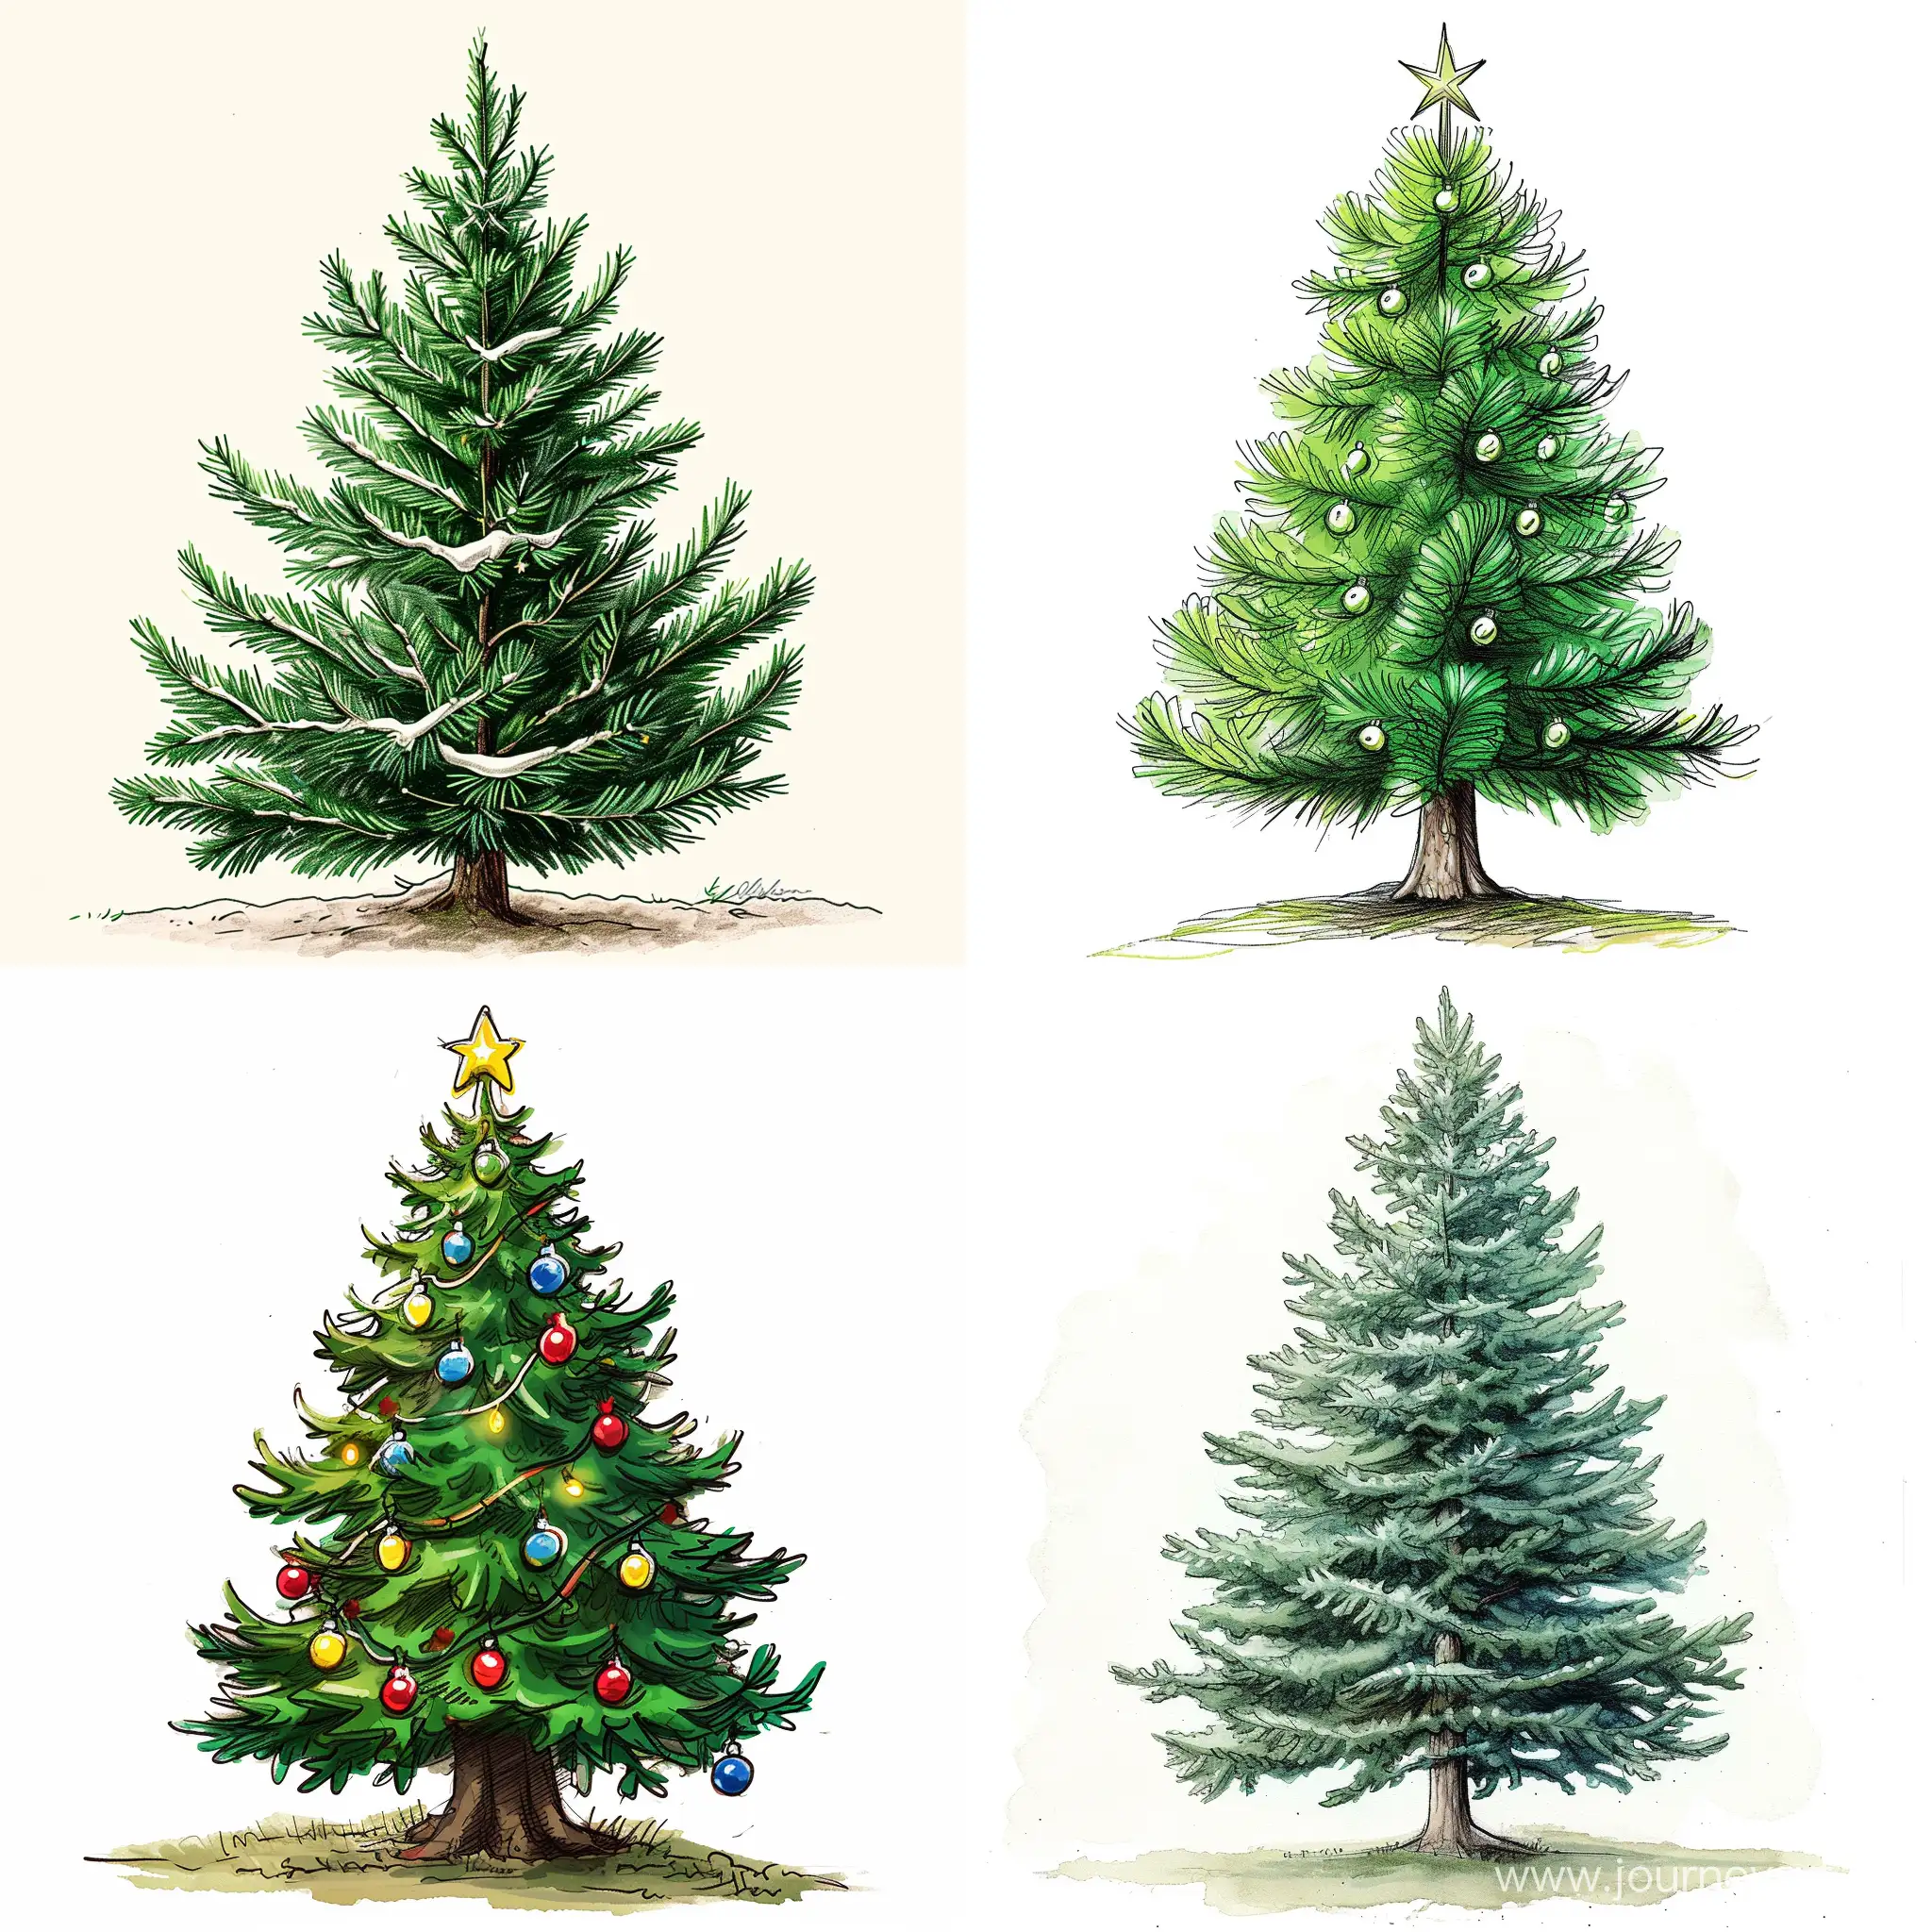 Festive-Christmas-Tree-Drawing-with-Vibrant-Colors